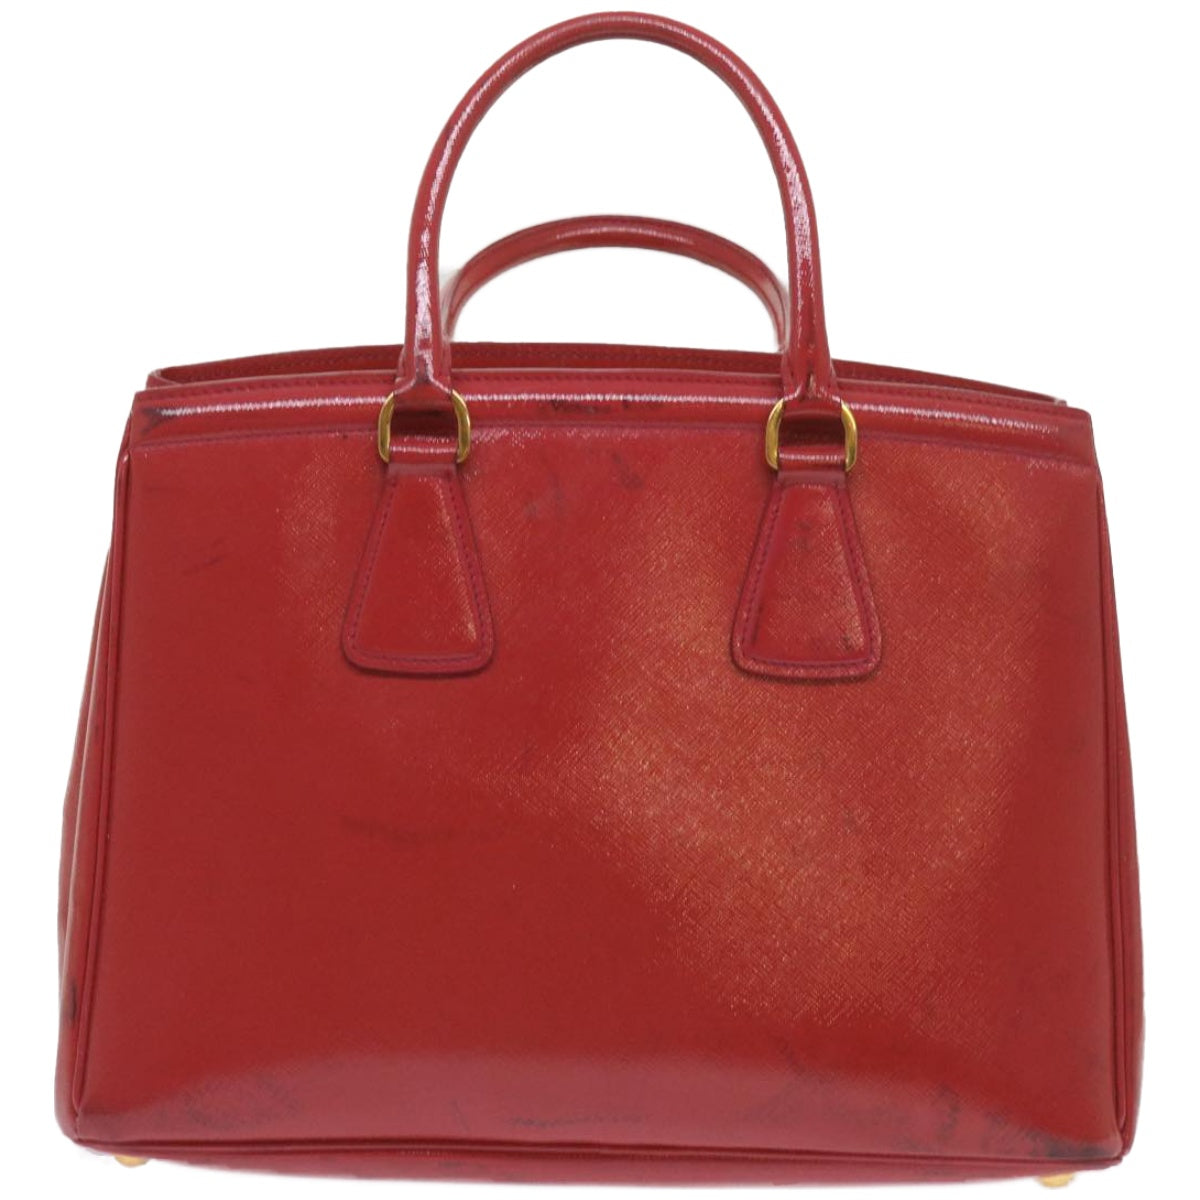 PRADA Hand Bag Leather Red Auth bs12371 - 0